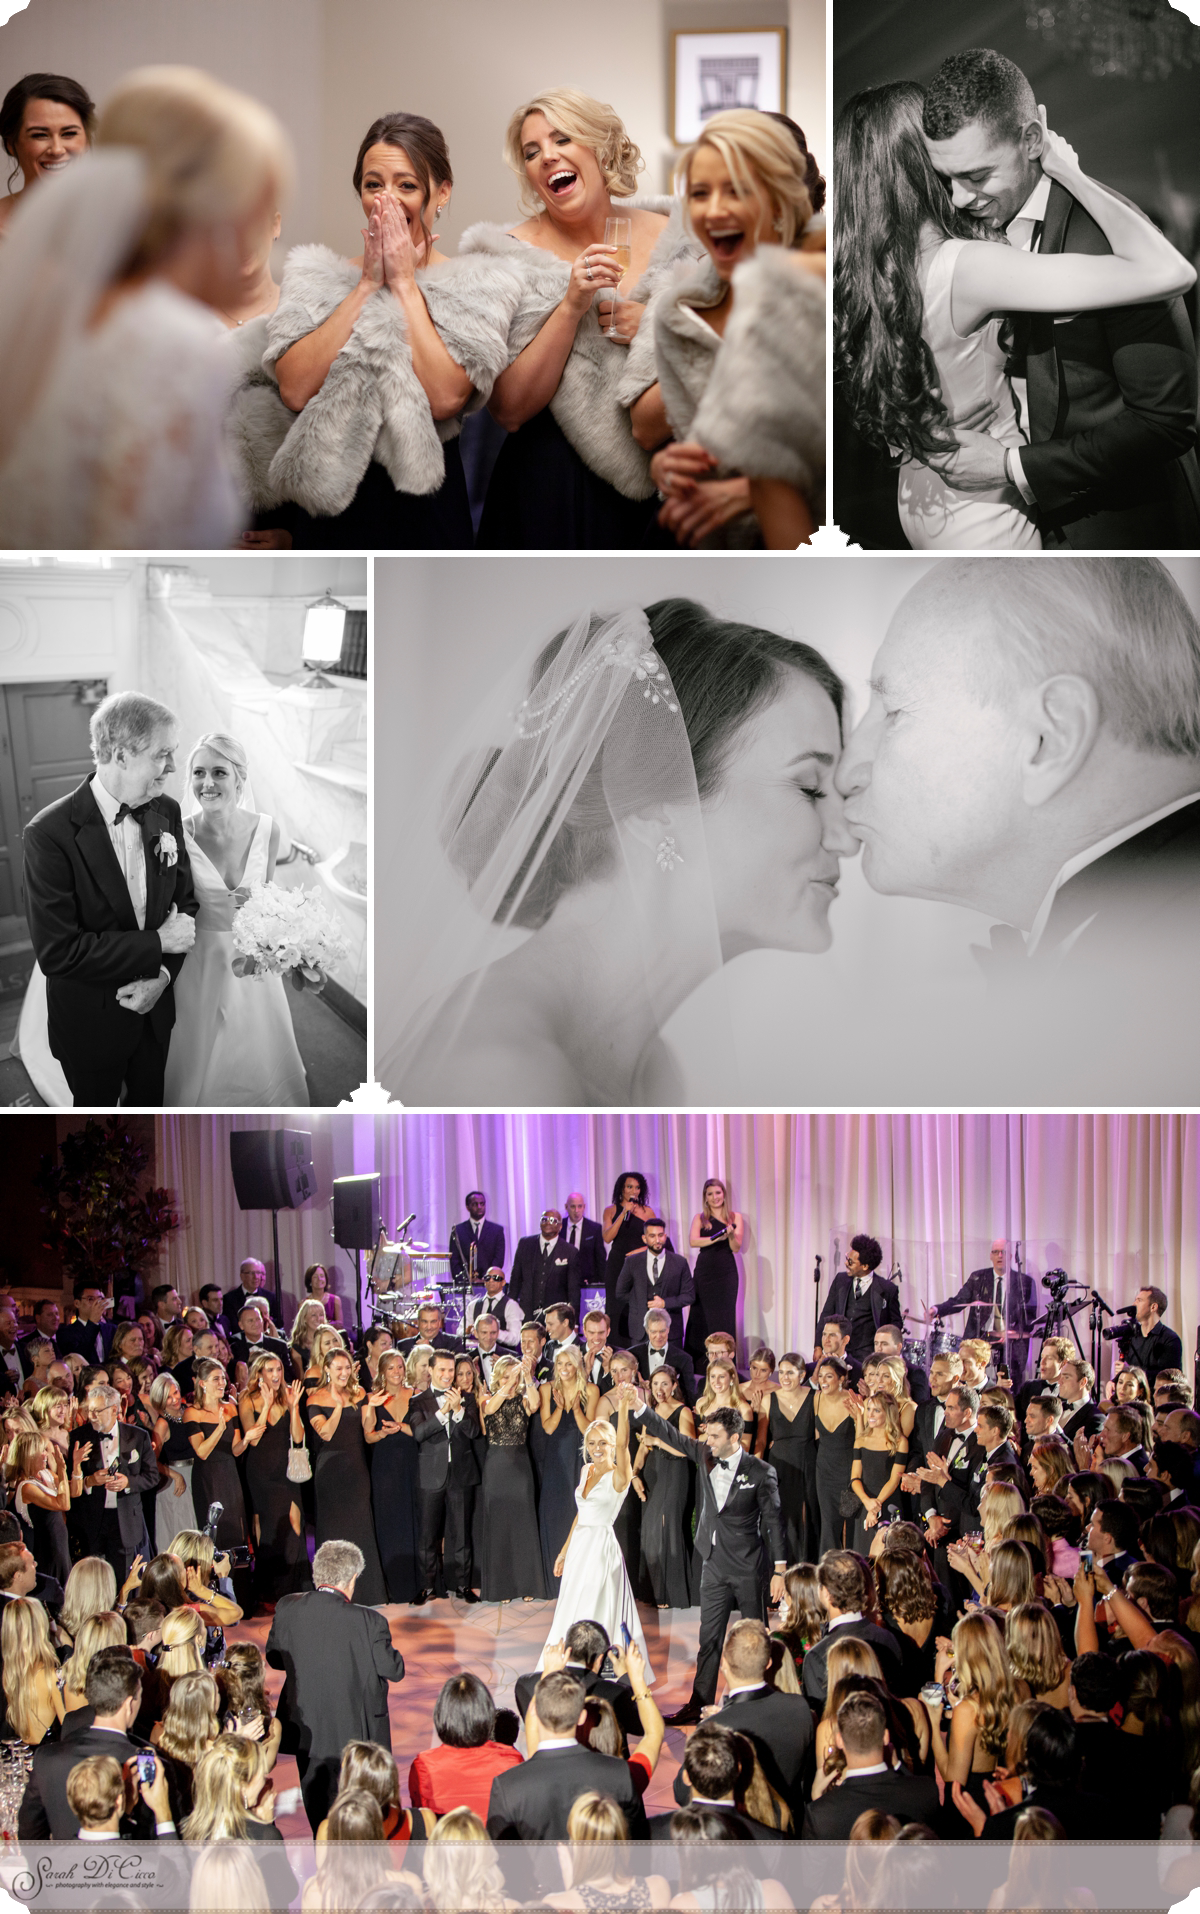 Wonderful Moments Sarah DiCicco Photography - Year in Review 2018